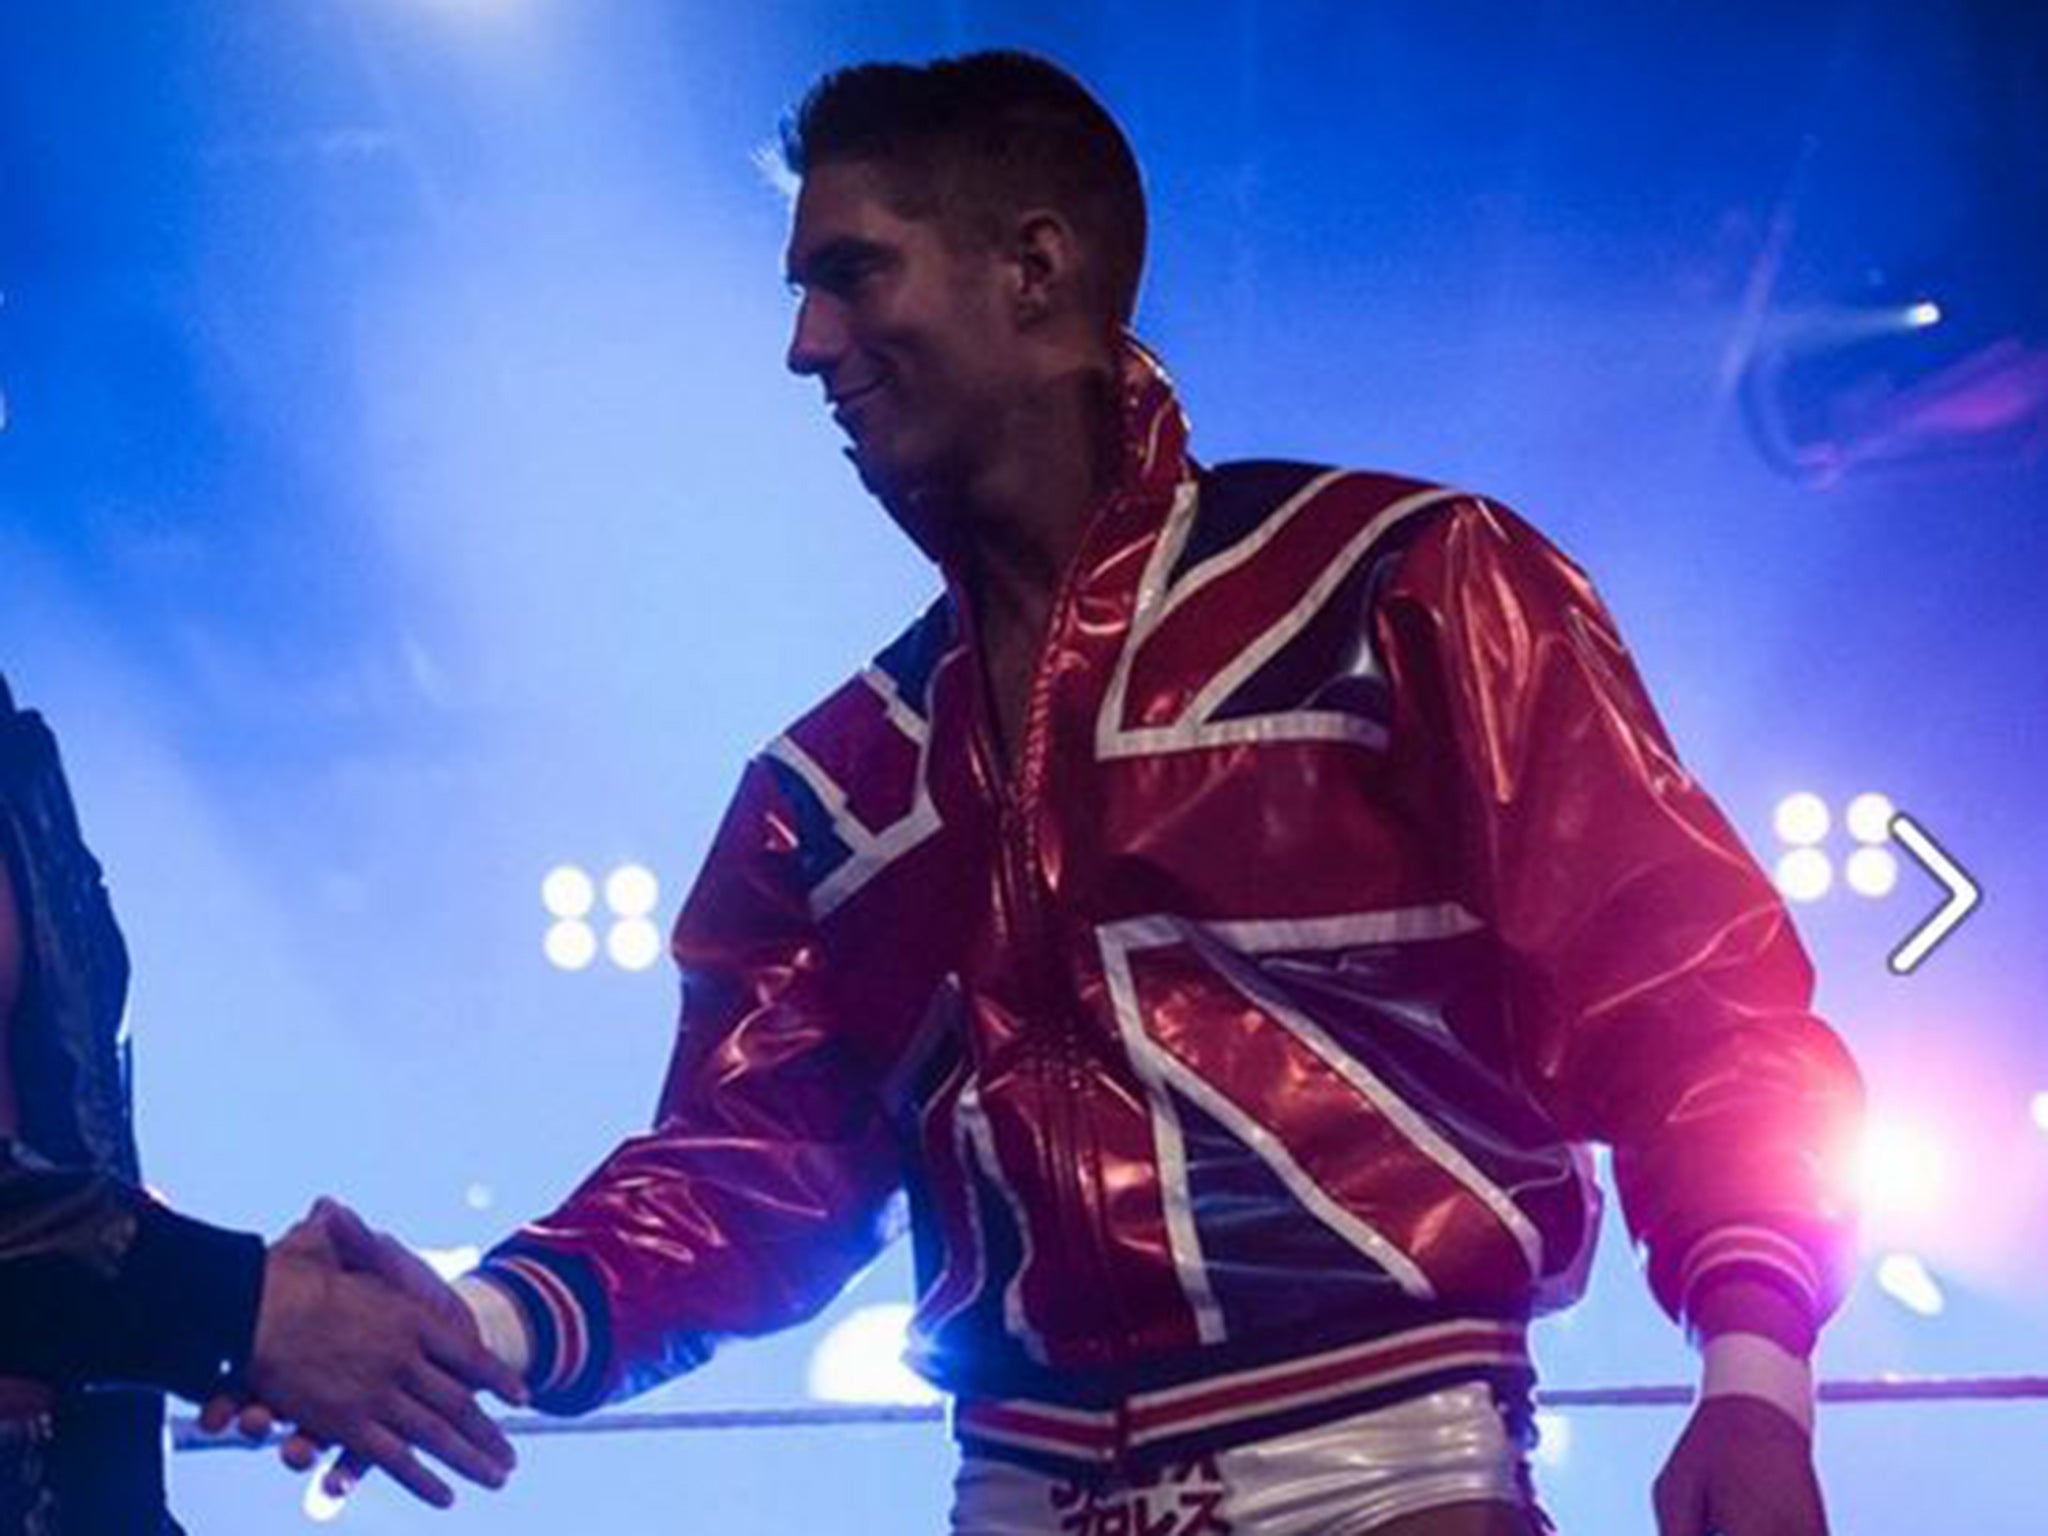 Zack Sabre Jr has advanced to the Global Cruiserweight tournament